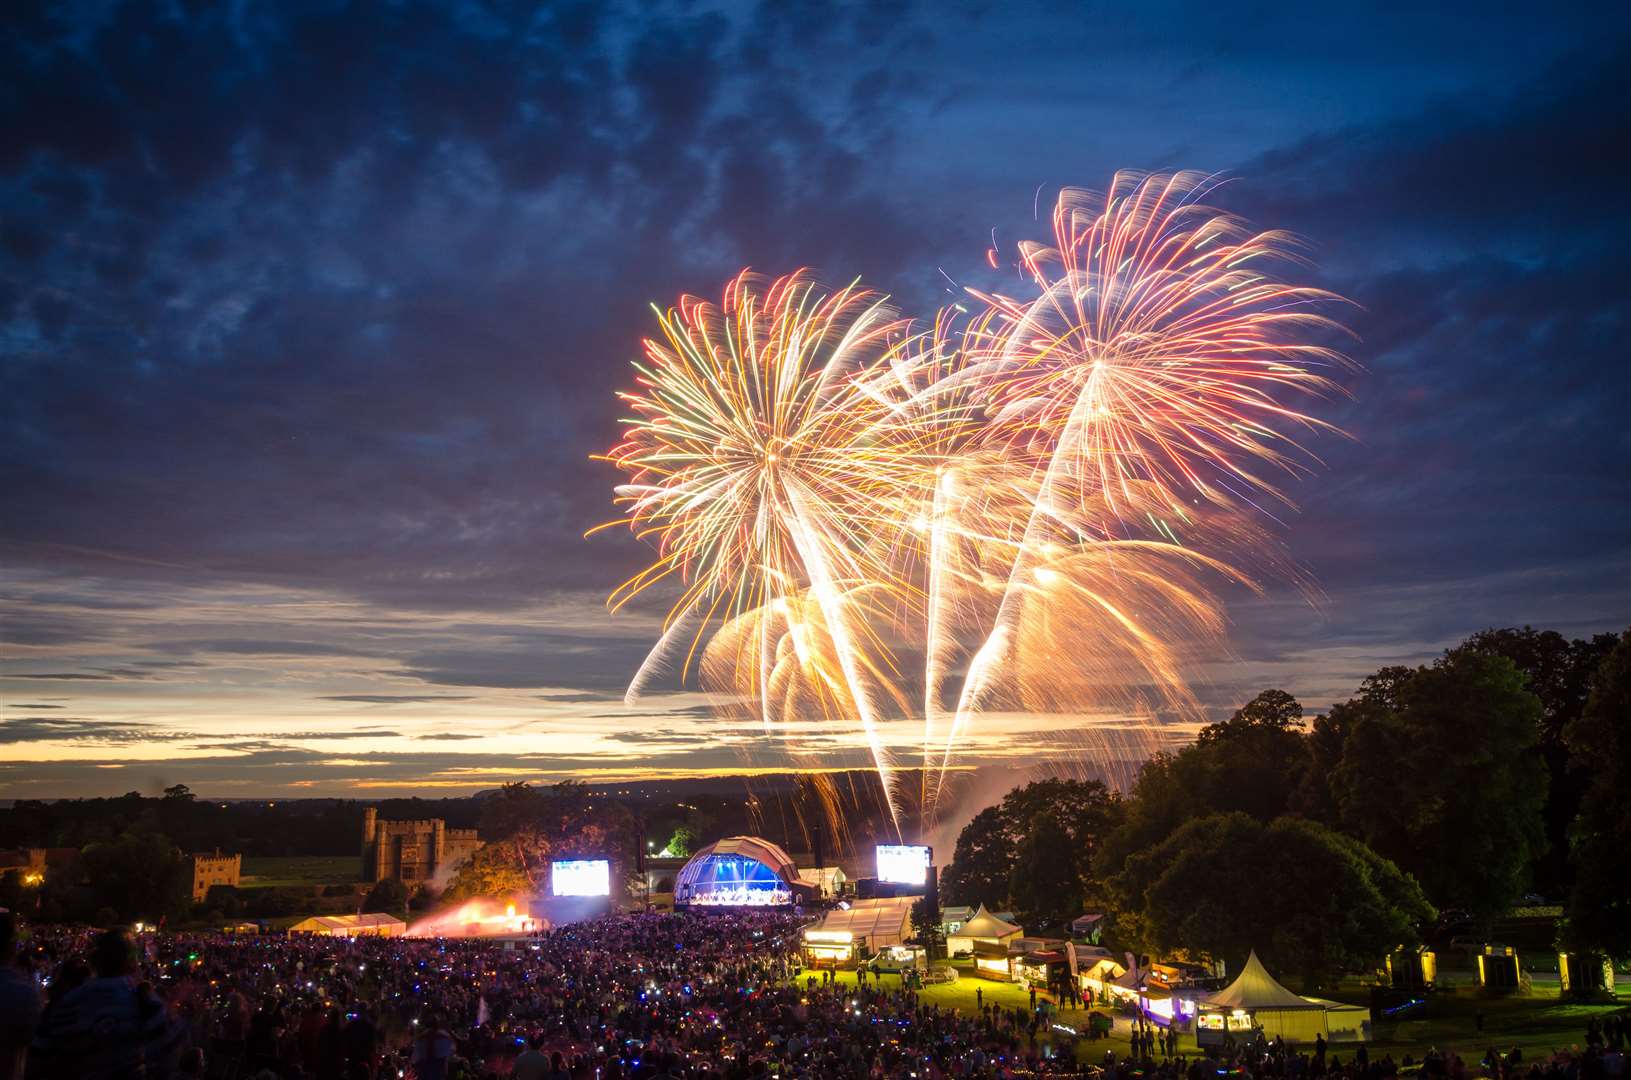 There are tickets to see the spectacular concert and fireworks at Leeds Castle